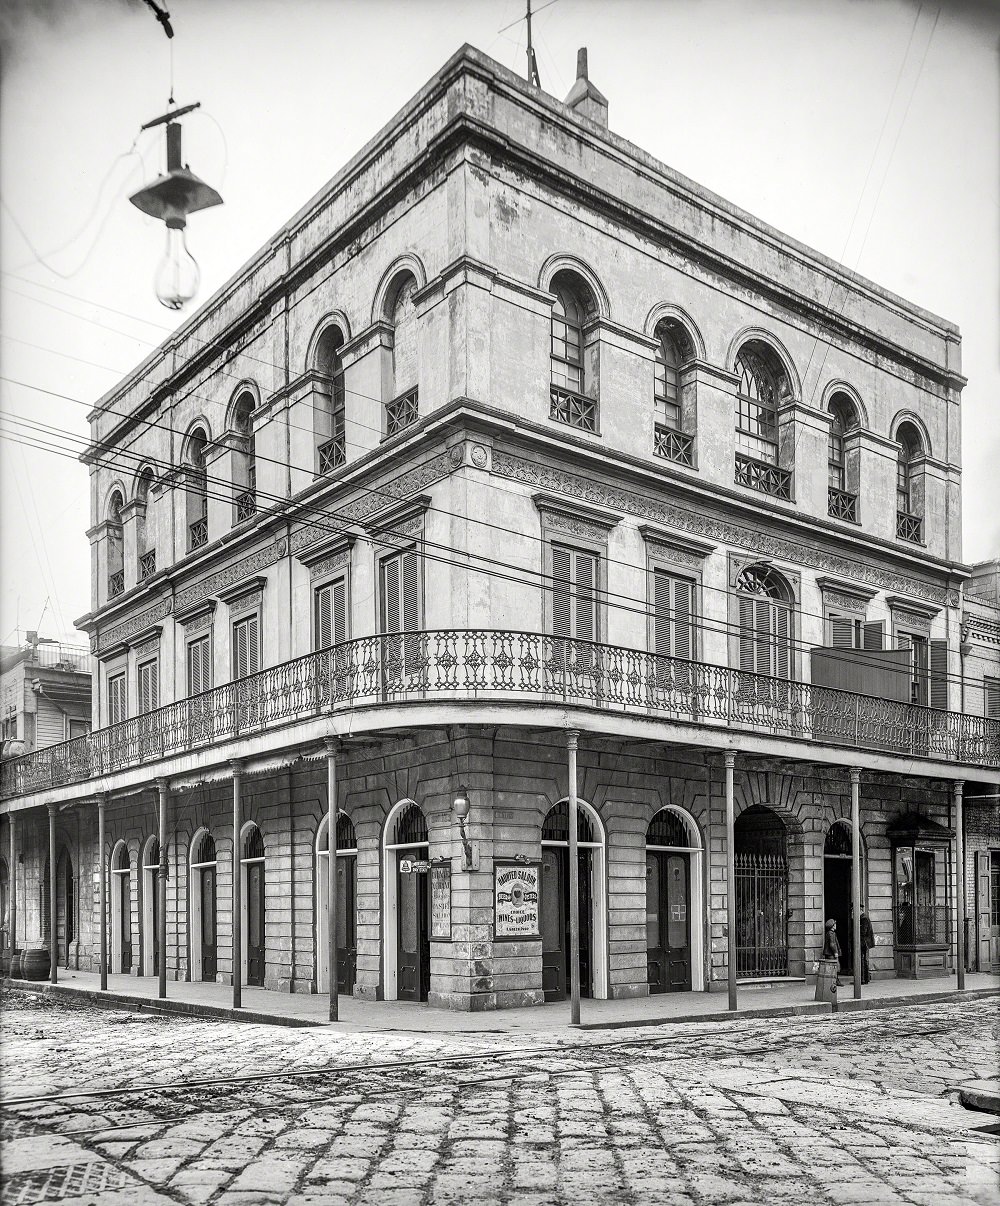 Haunted House (Warrington House), Royal and Hospital Streets, New Orleans circa 1906